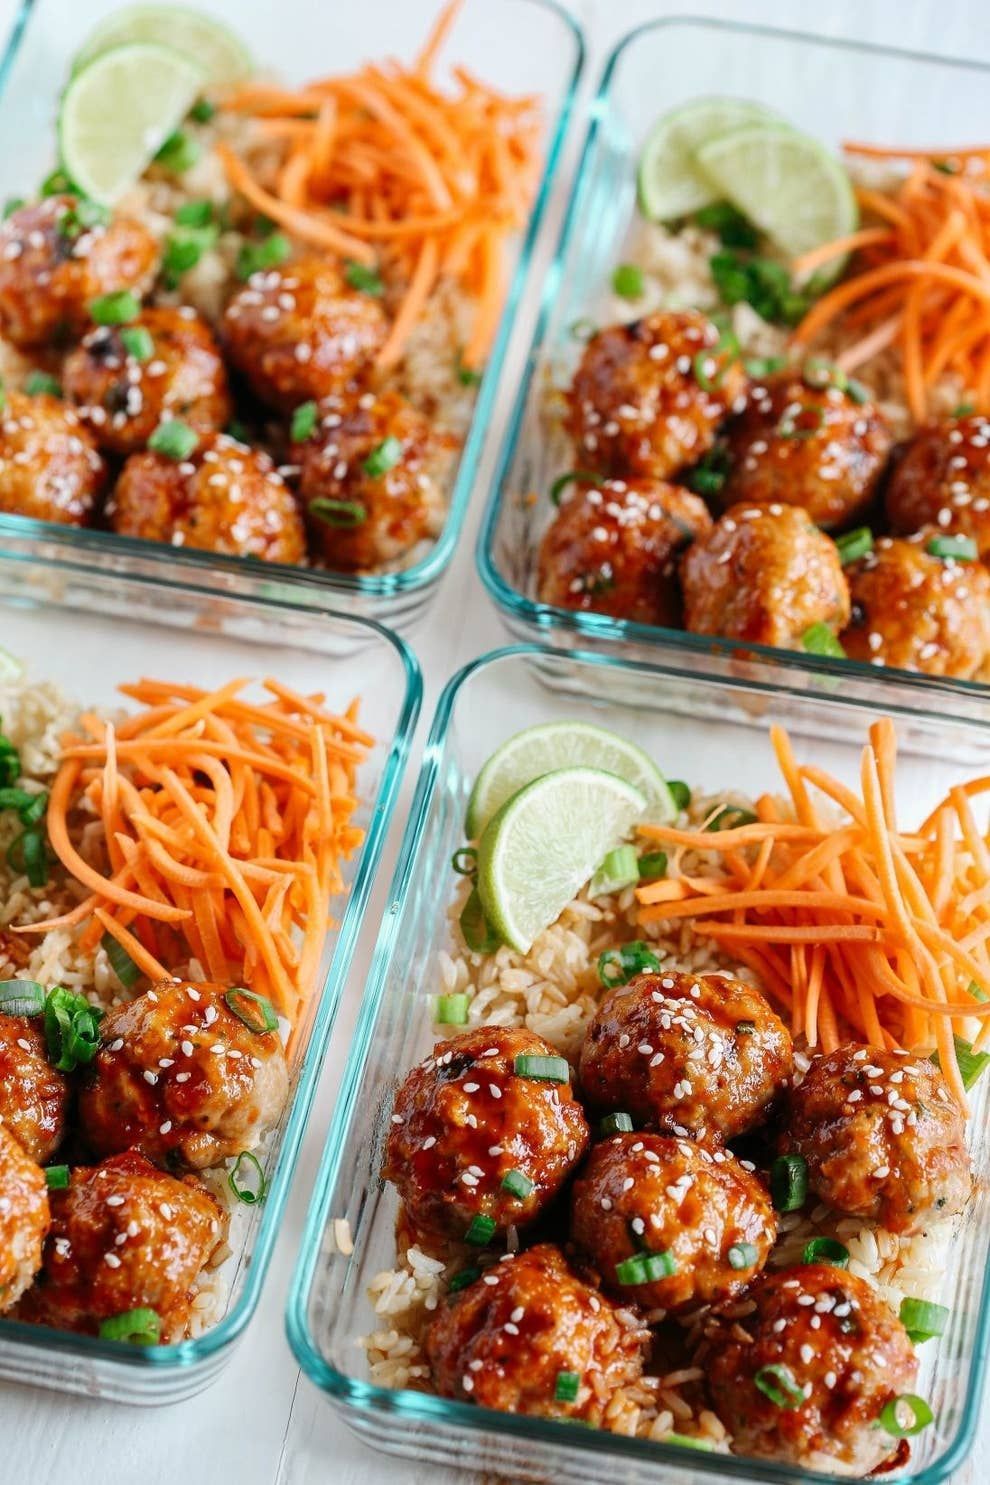 18 meal prep recipes for the week ideas